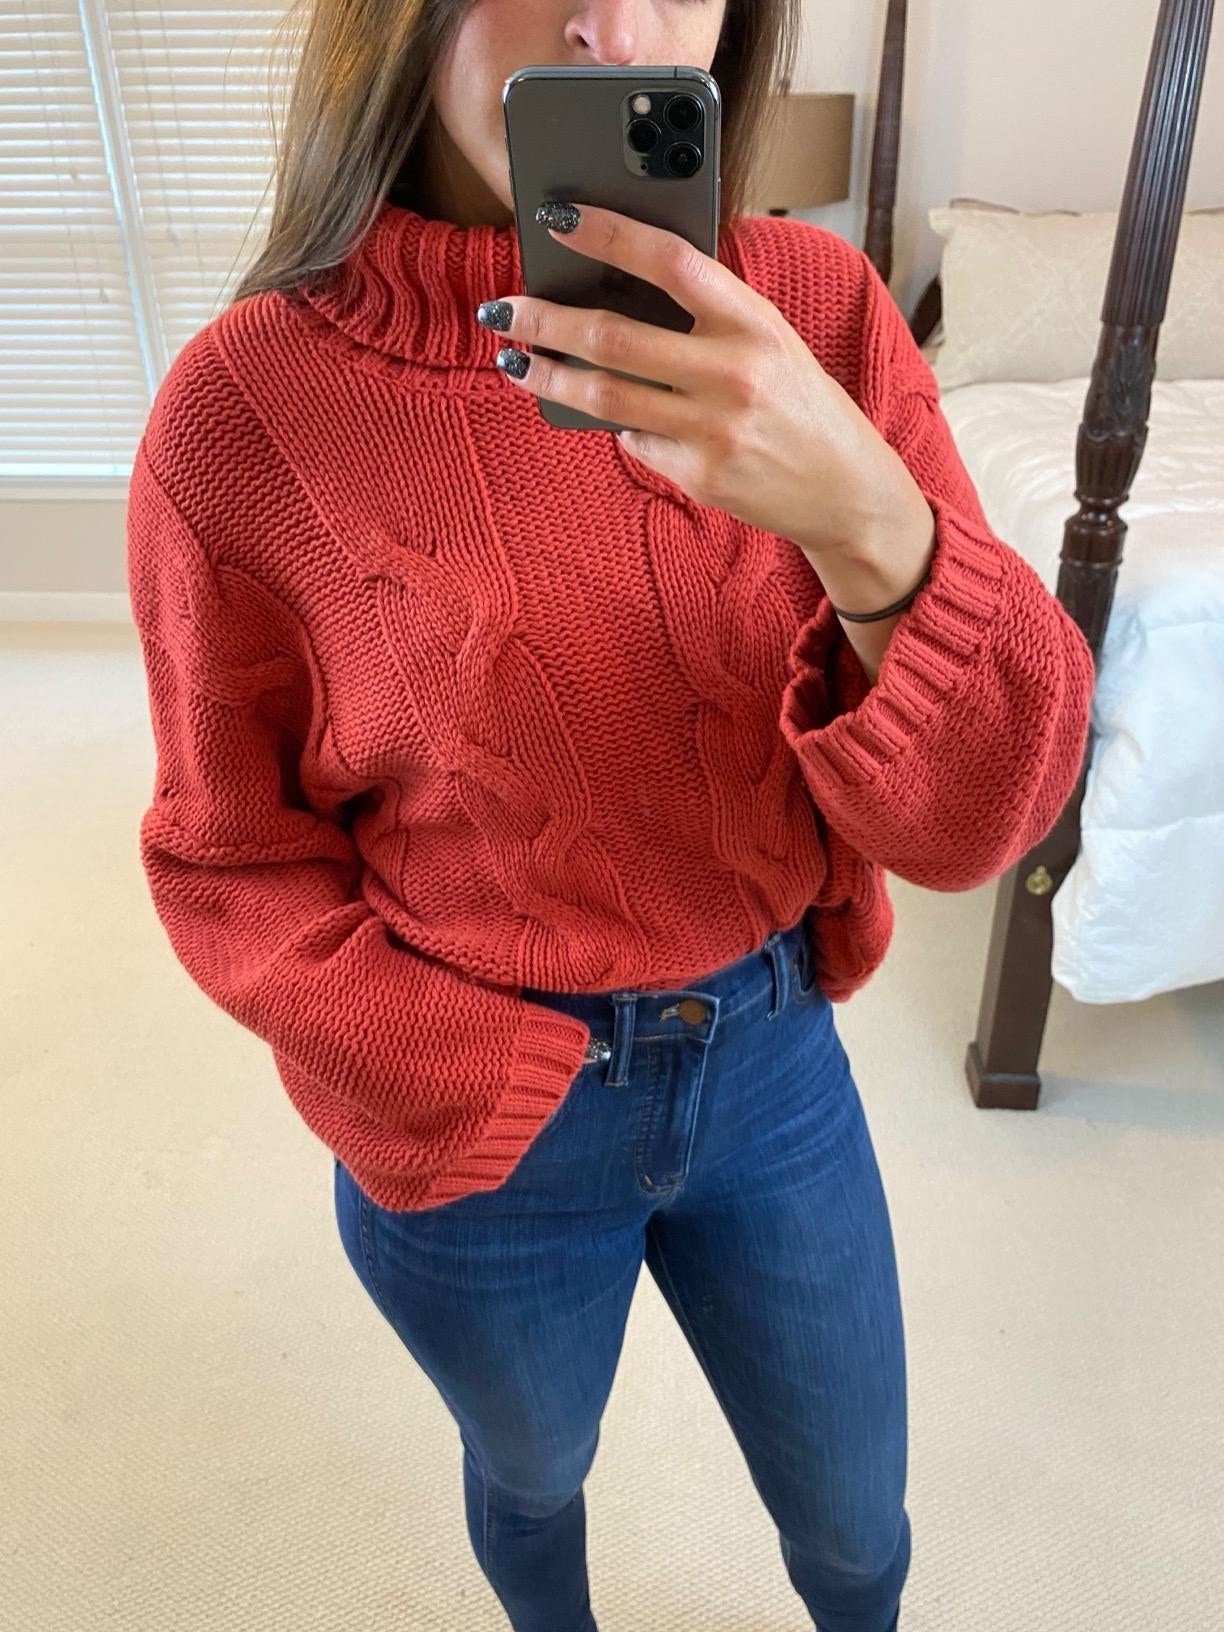 reviewer in a cabled wide-sleeved red turtleneck